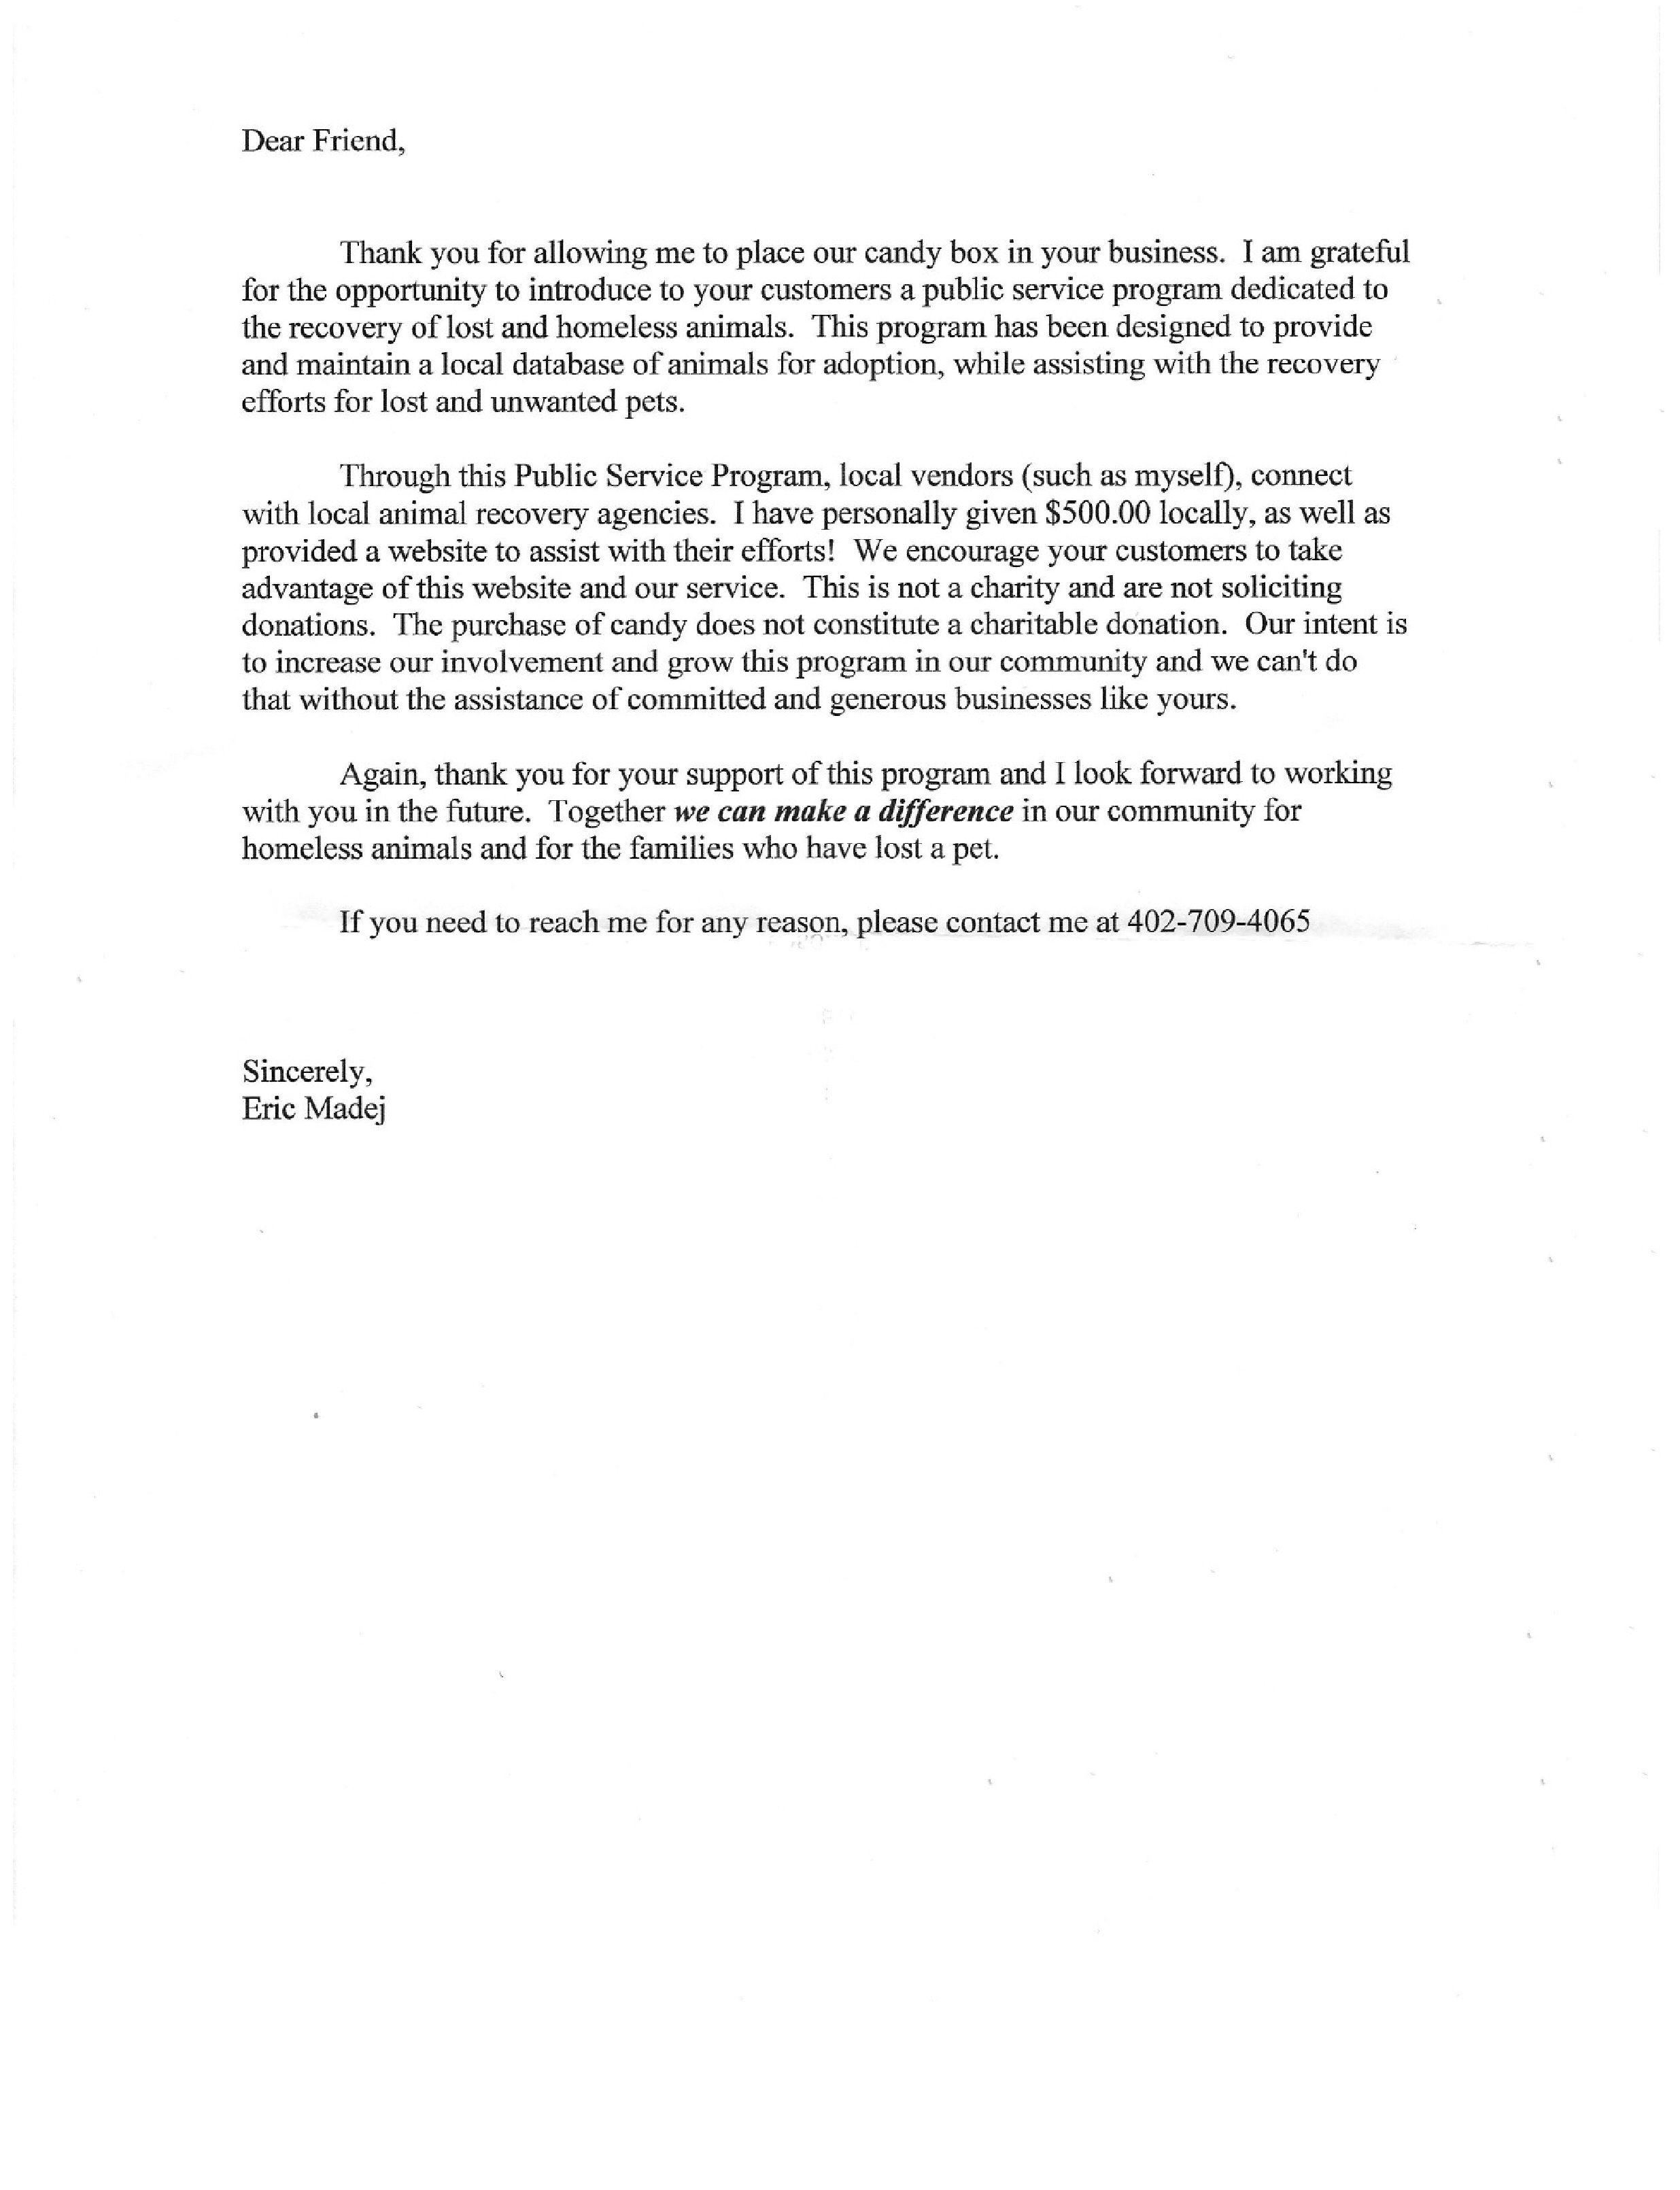 US Pet Recovery Letter